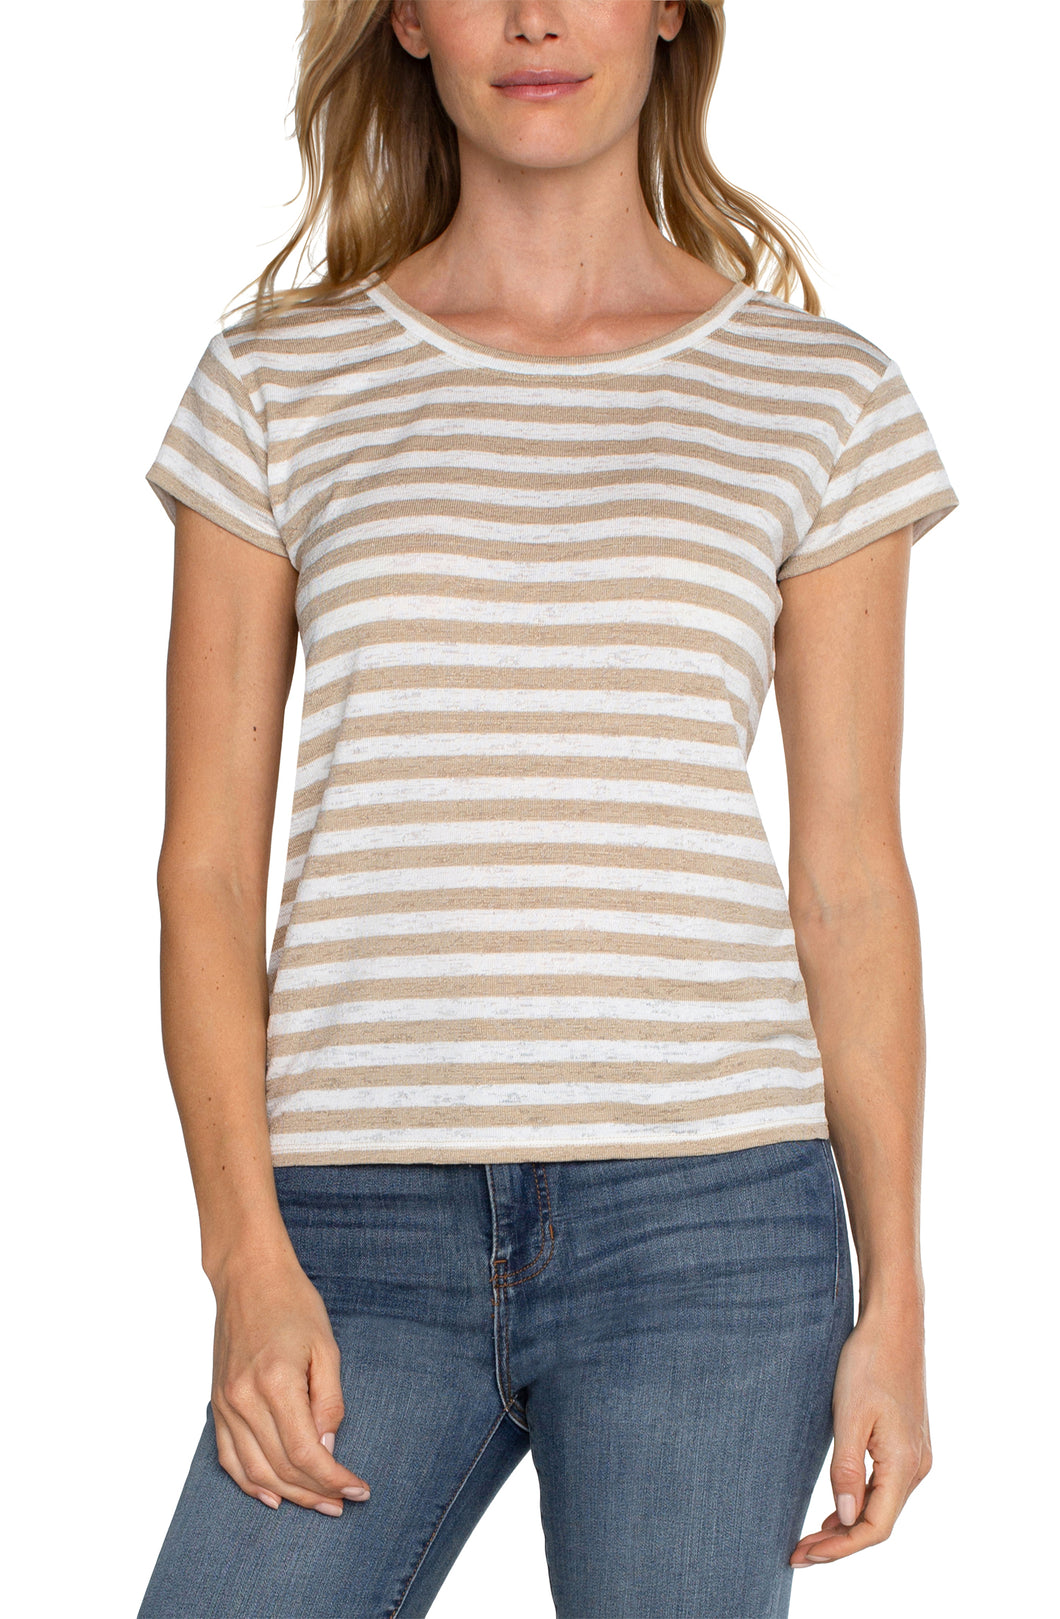 Cinched Back Striped Tee